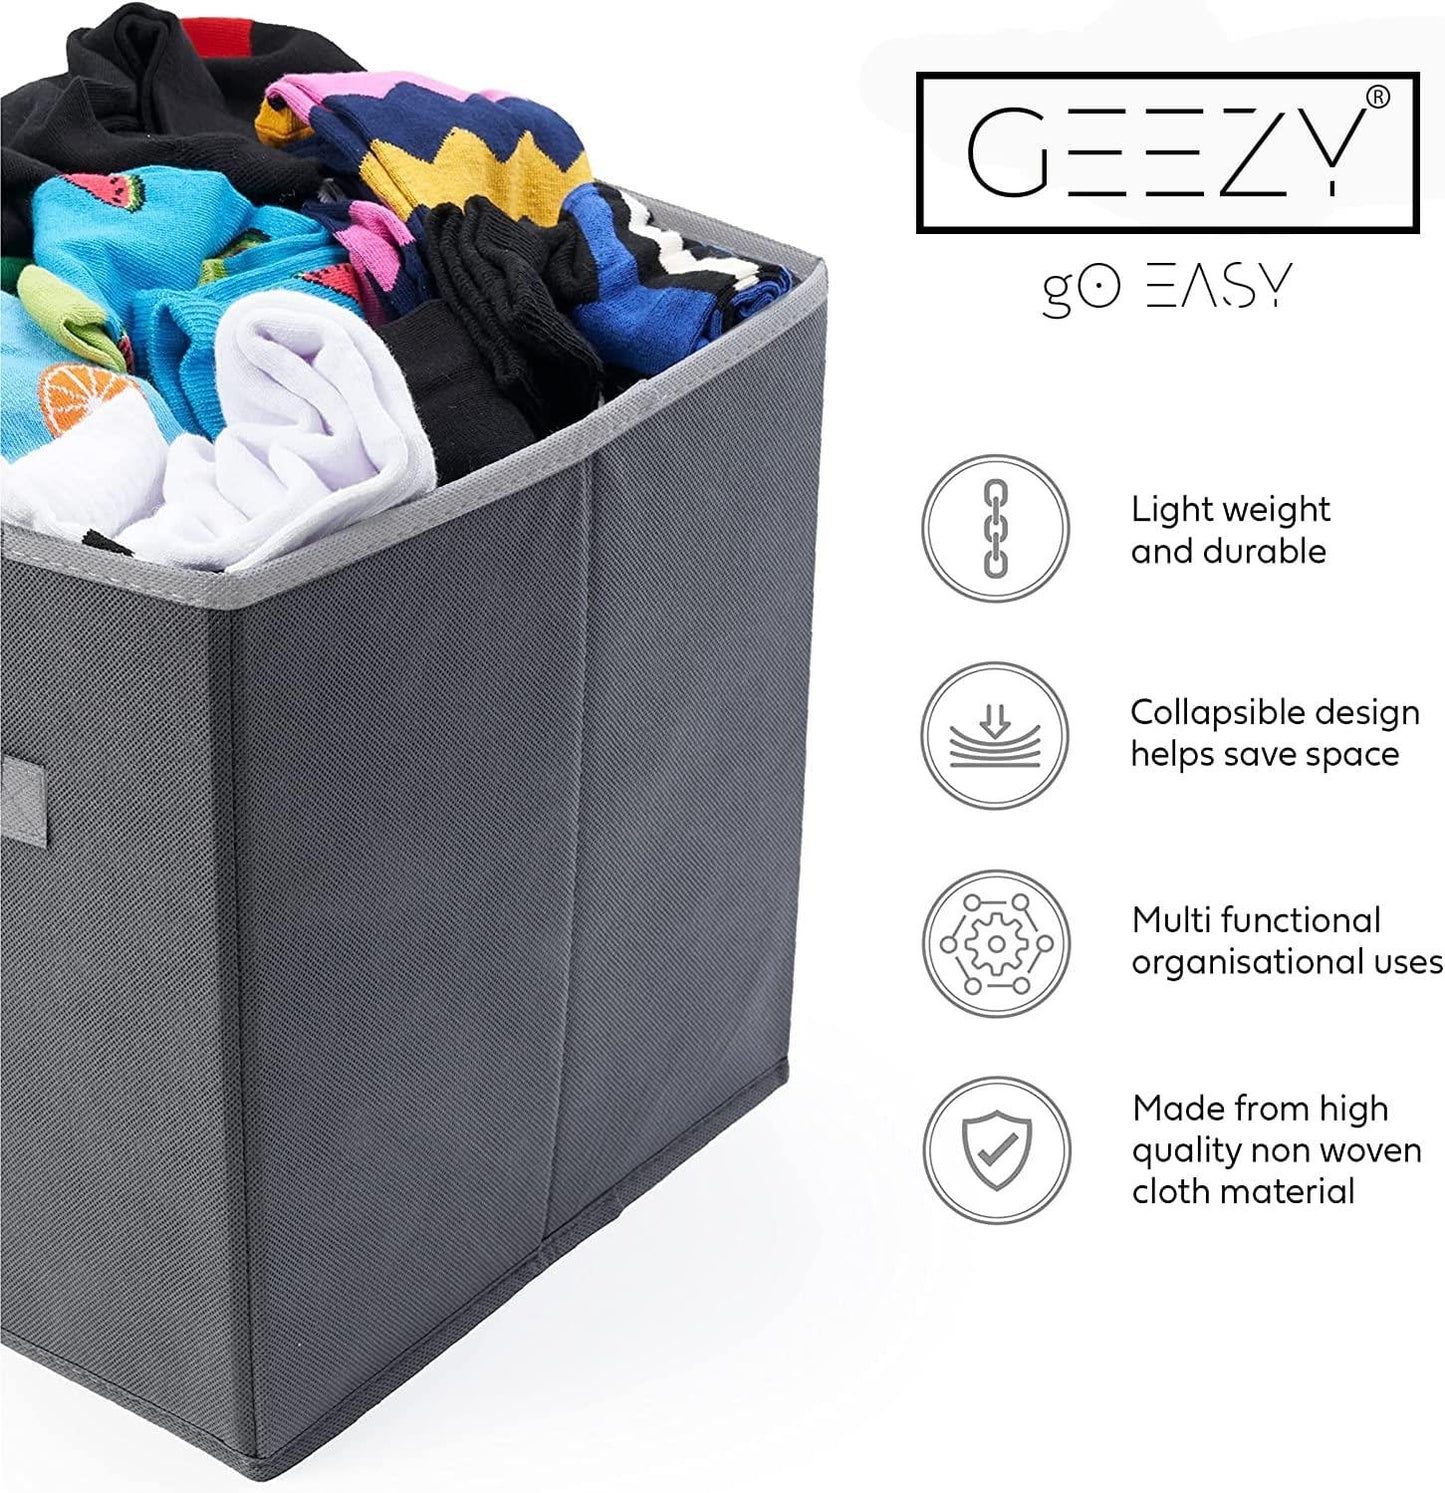 Foldable Square Canvas Storage by GEEZY - UKBuyZone